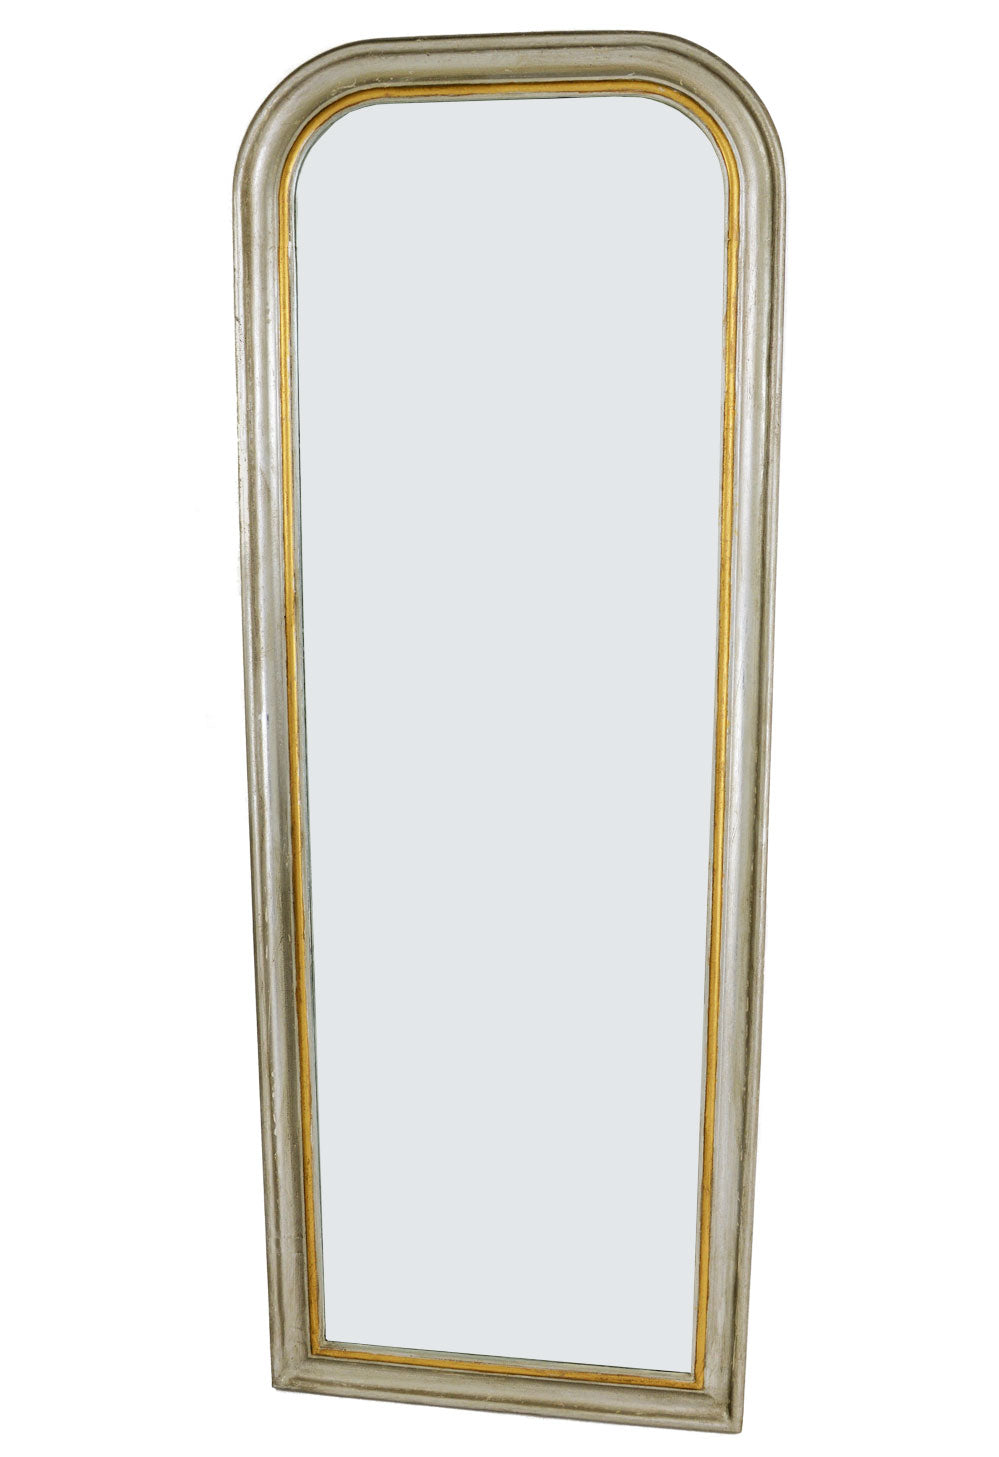 Silver & Gold Full Length Rounded Mirror